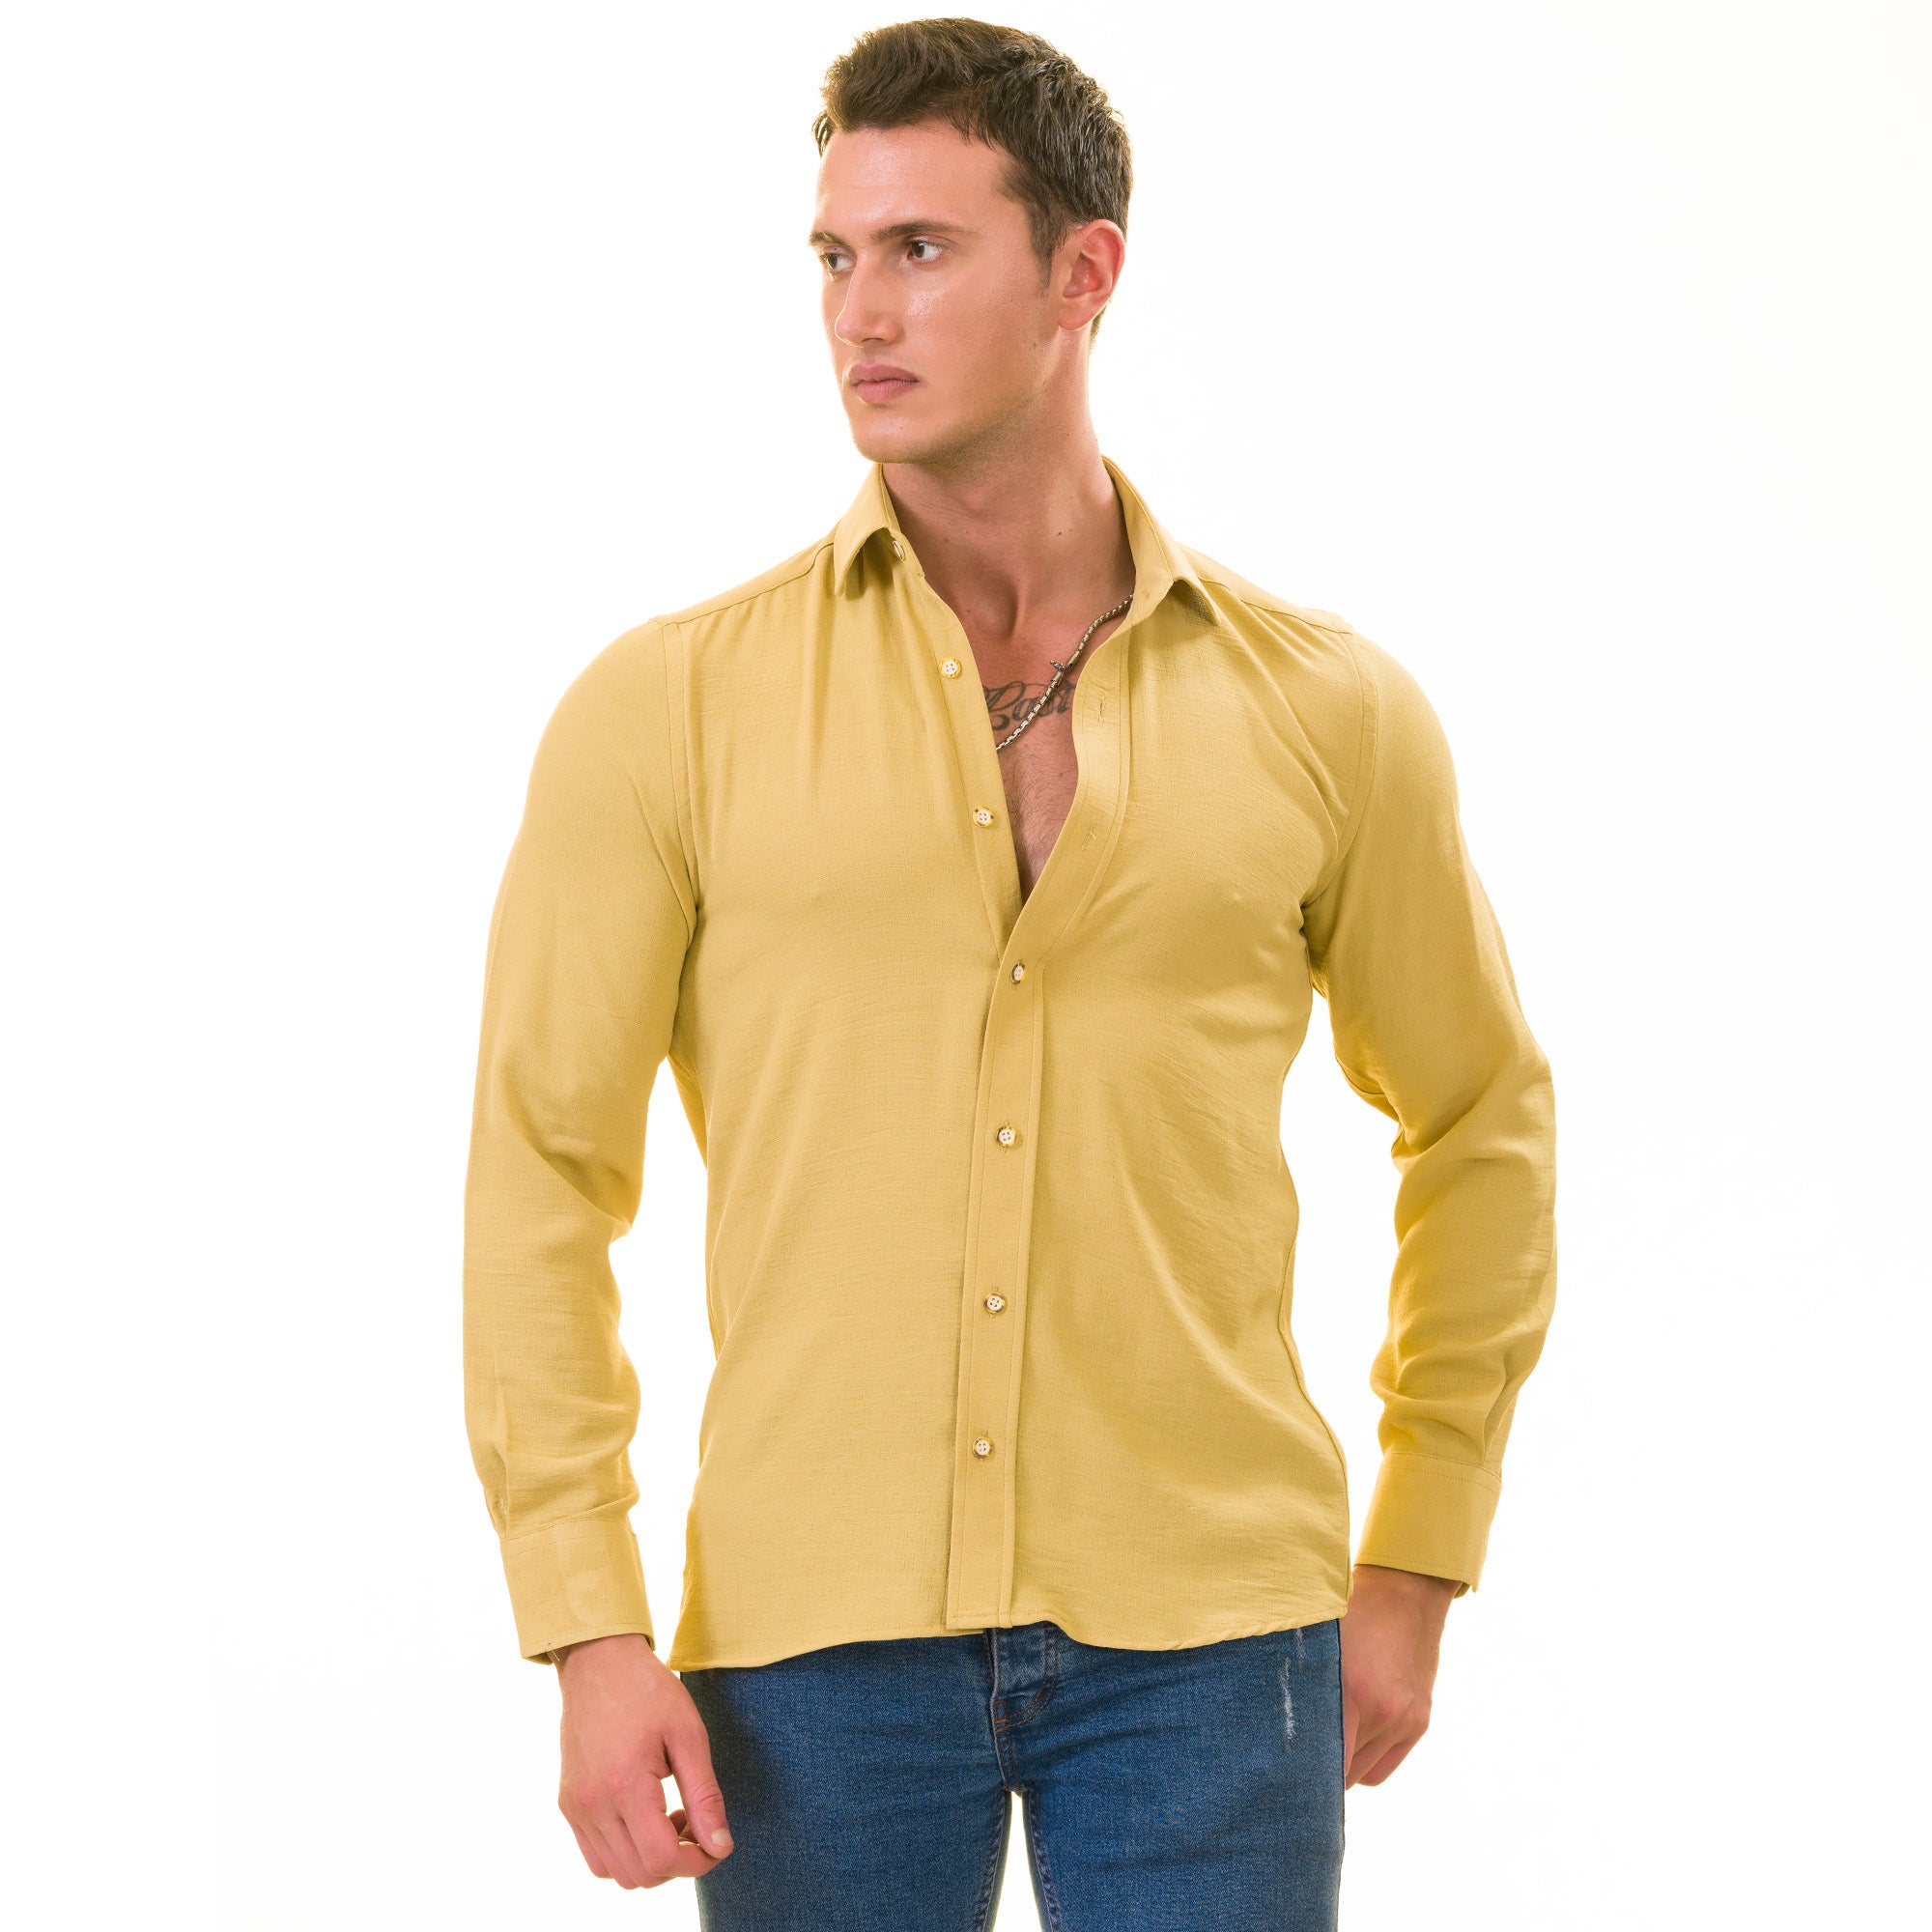 Mustard Colored Luxury Men's Tailor Fit Button Up European Made Linen Shirts